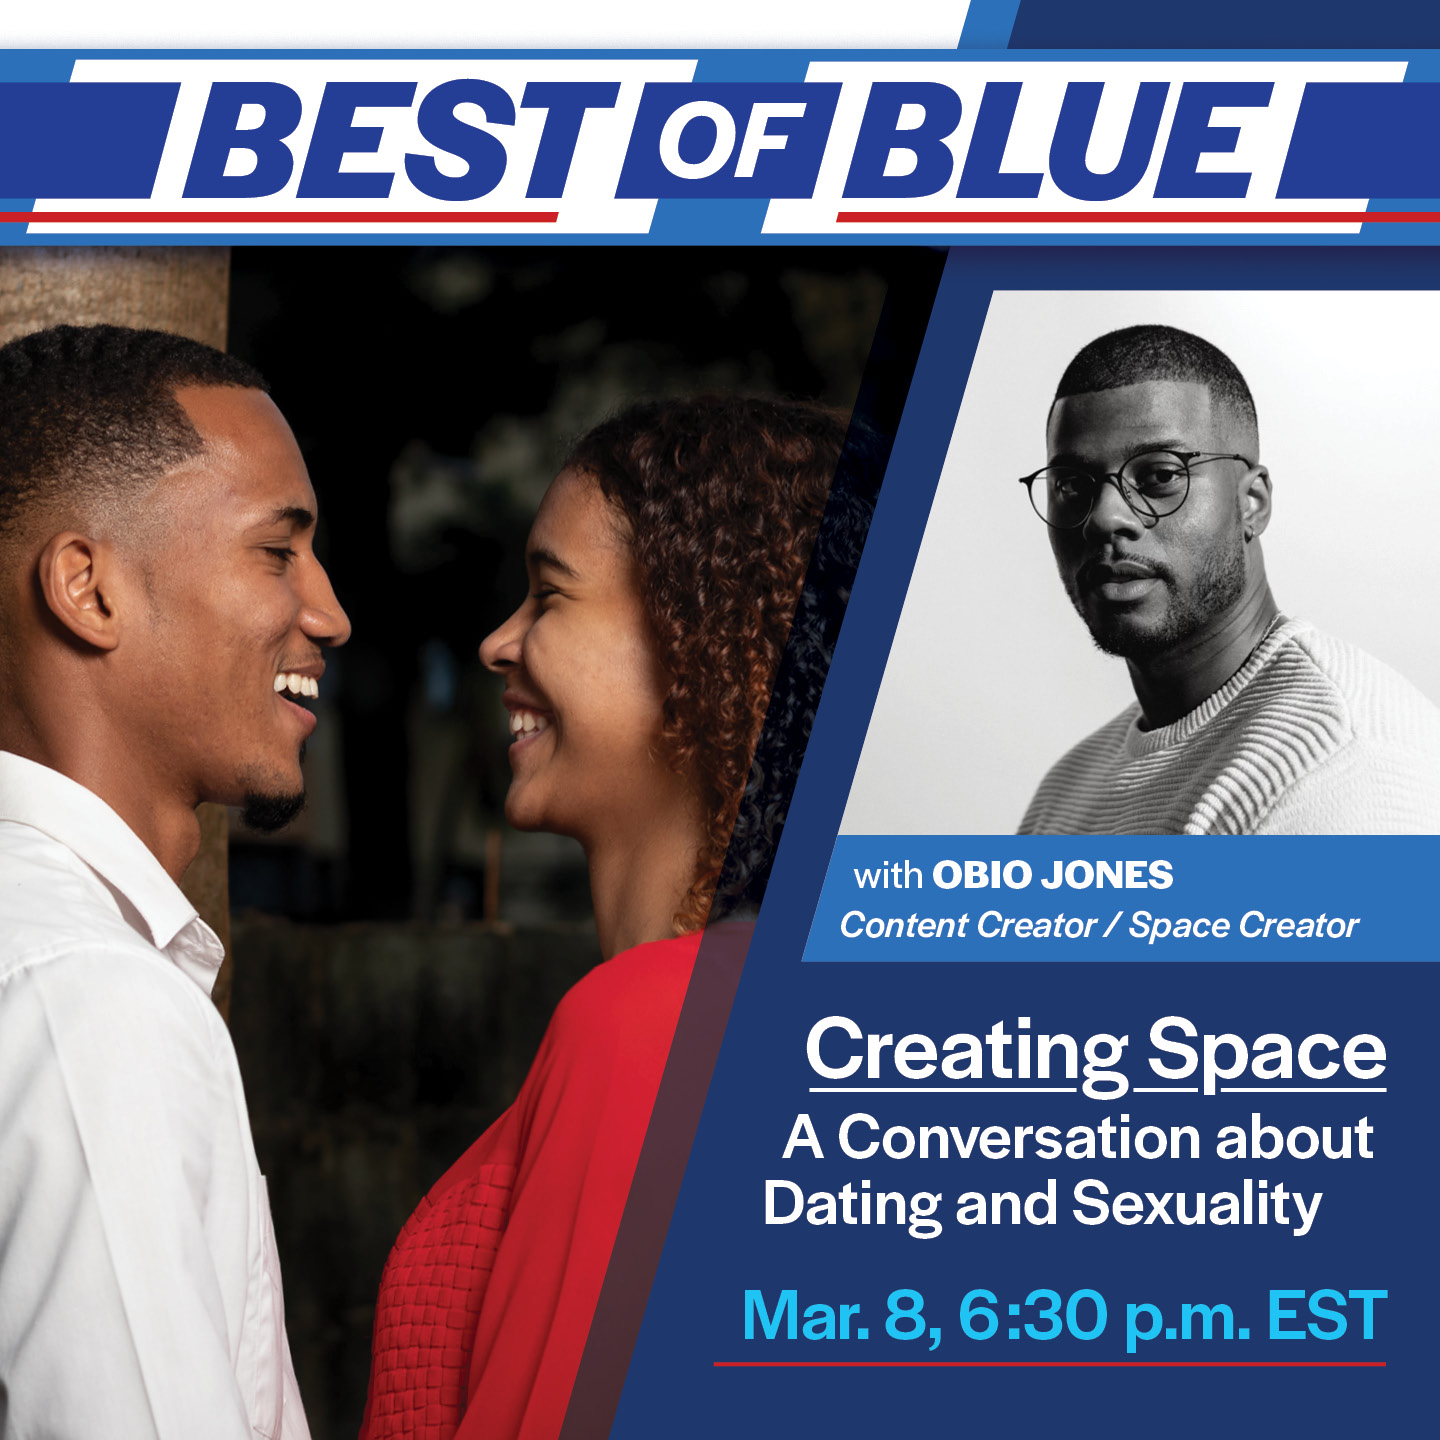 Image for Best of Blue: Dating & Sexuality webinar